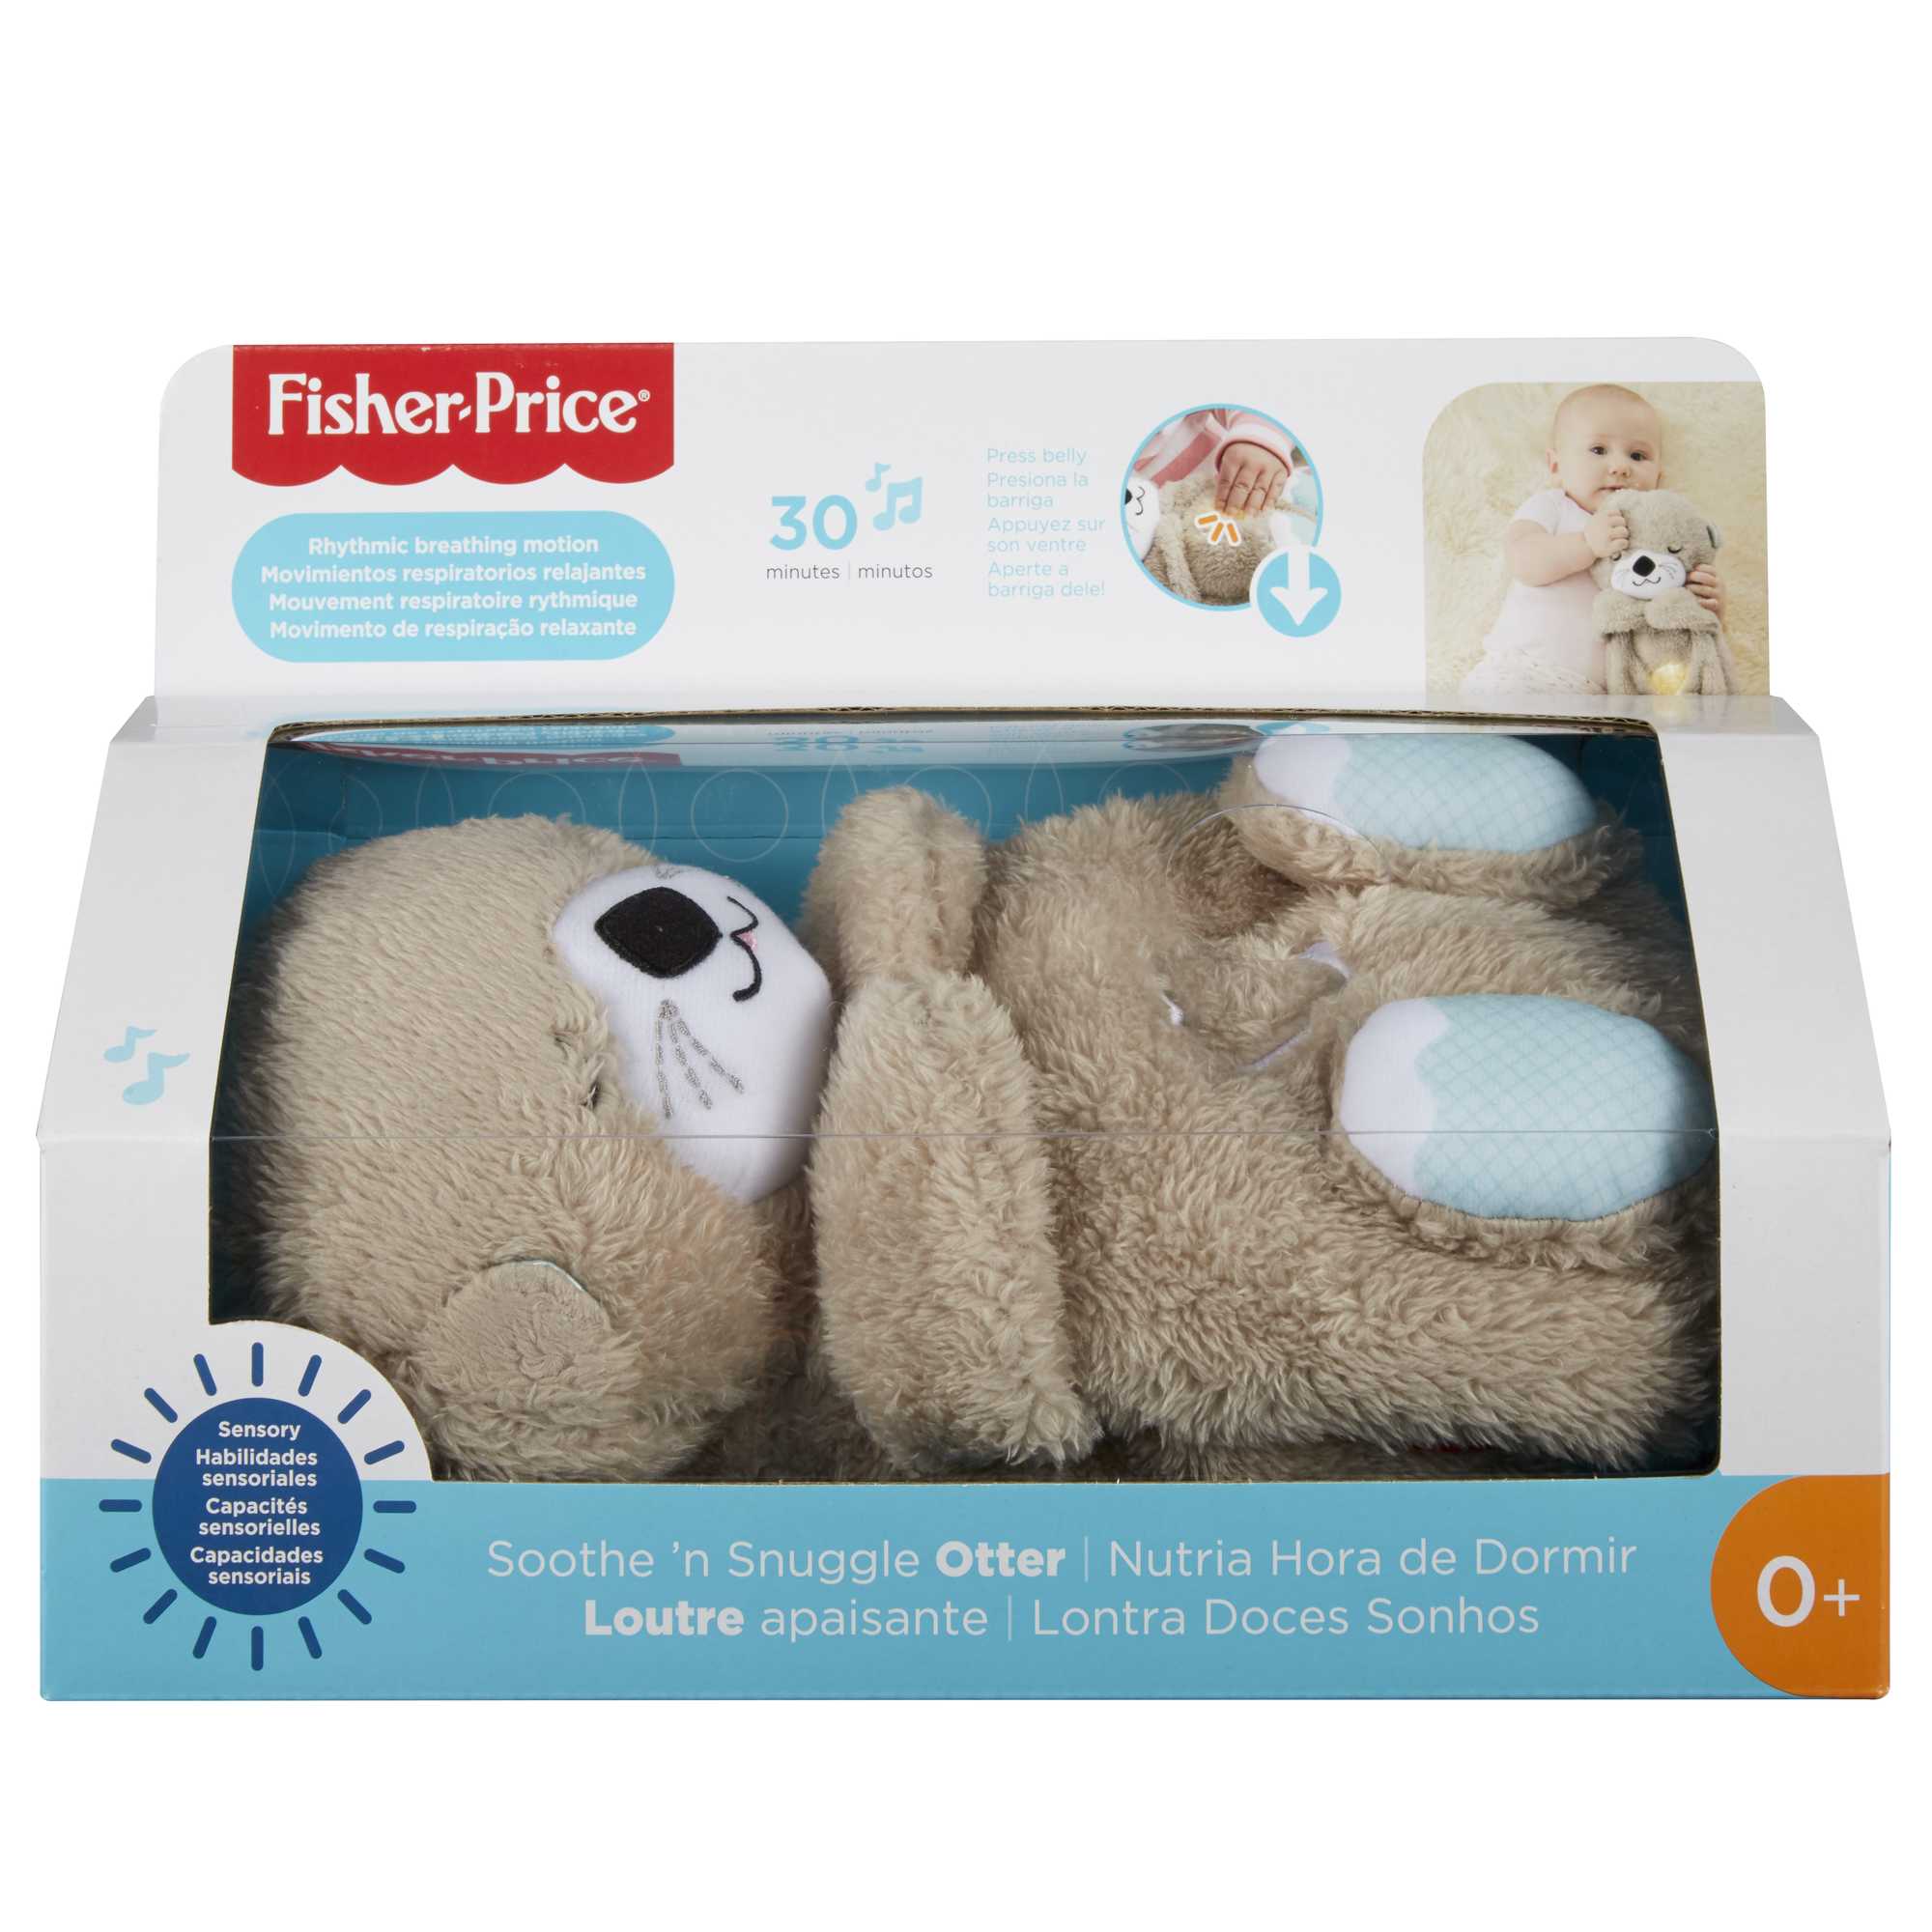 doudou loutre / otter Fisher Price